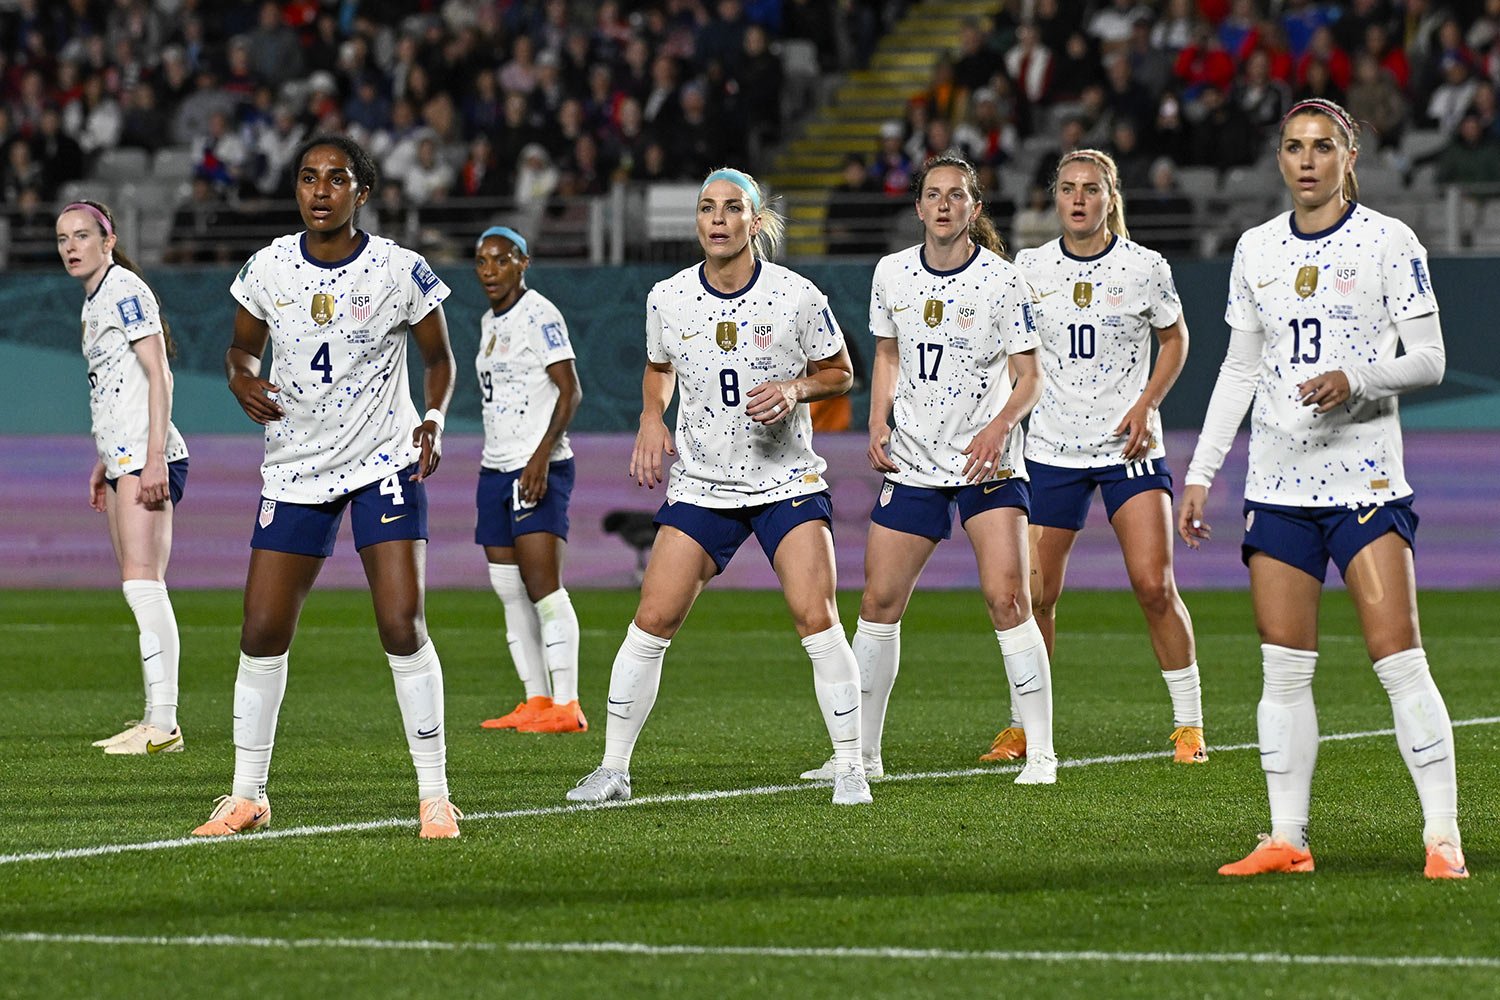  Team USA waits for a corner kick during the Women's World Cup Group E soccer match against Portugal, at Eden Park in Auckland, New Zealand, Aug. 1, 2023. (AP Photo/Andrew Cornaga) 